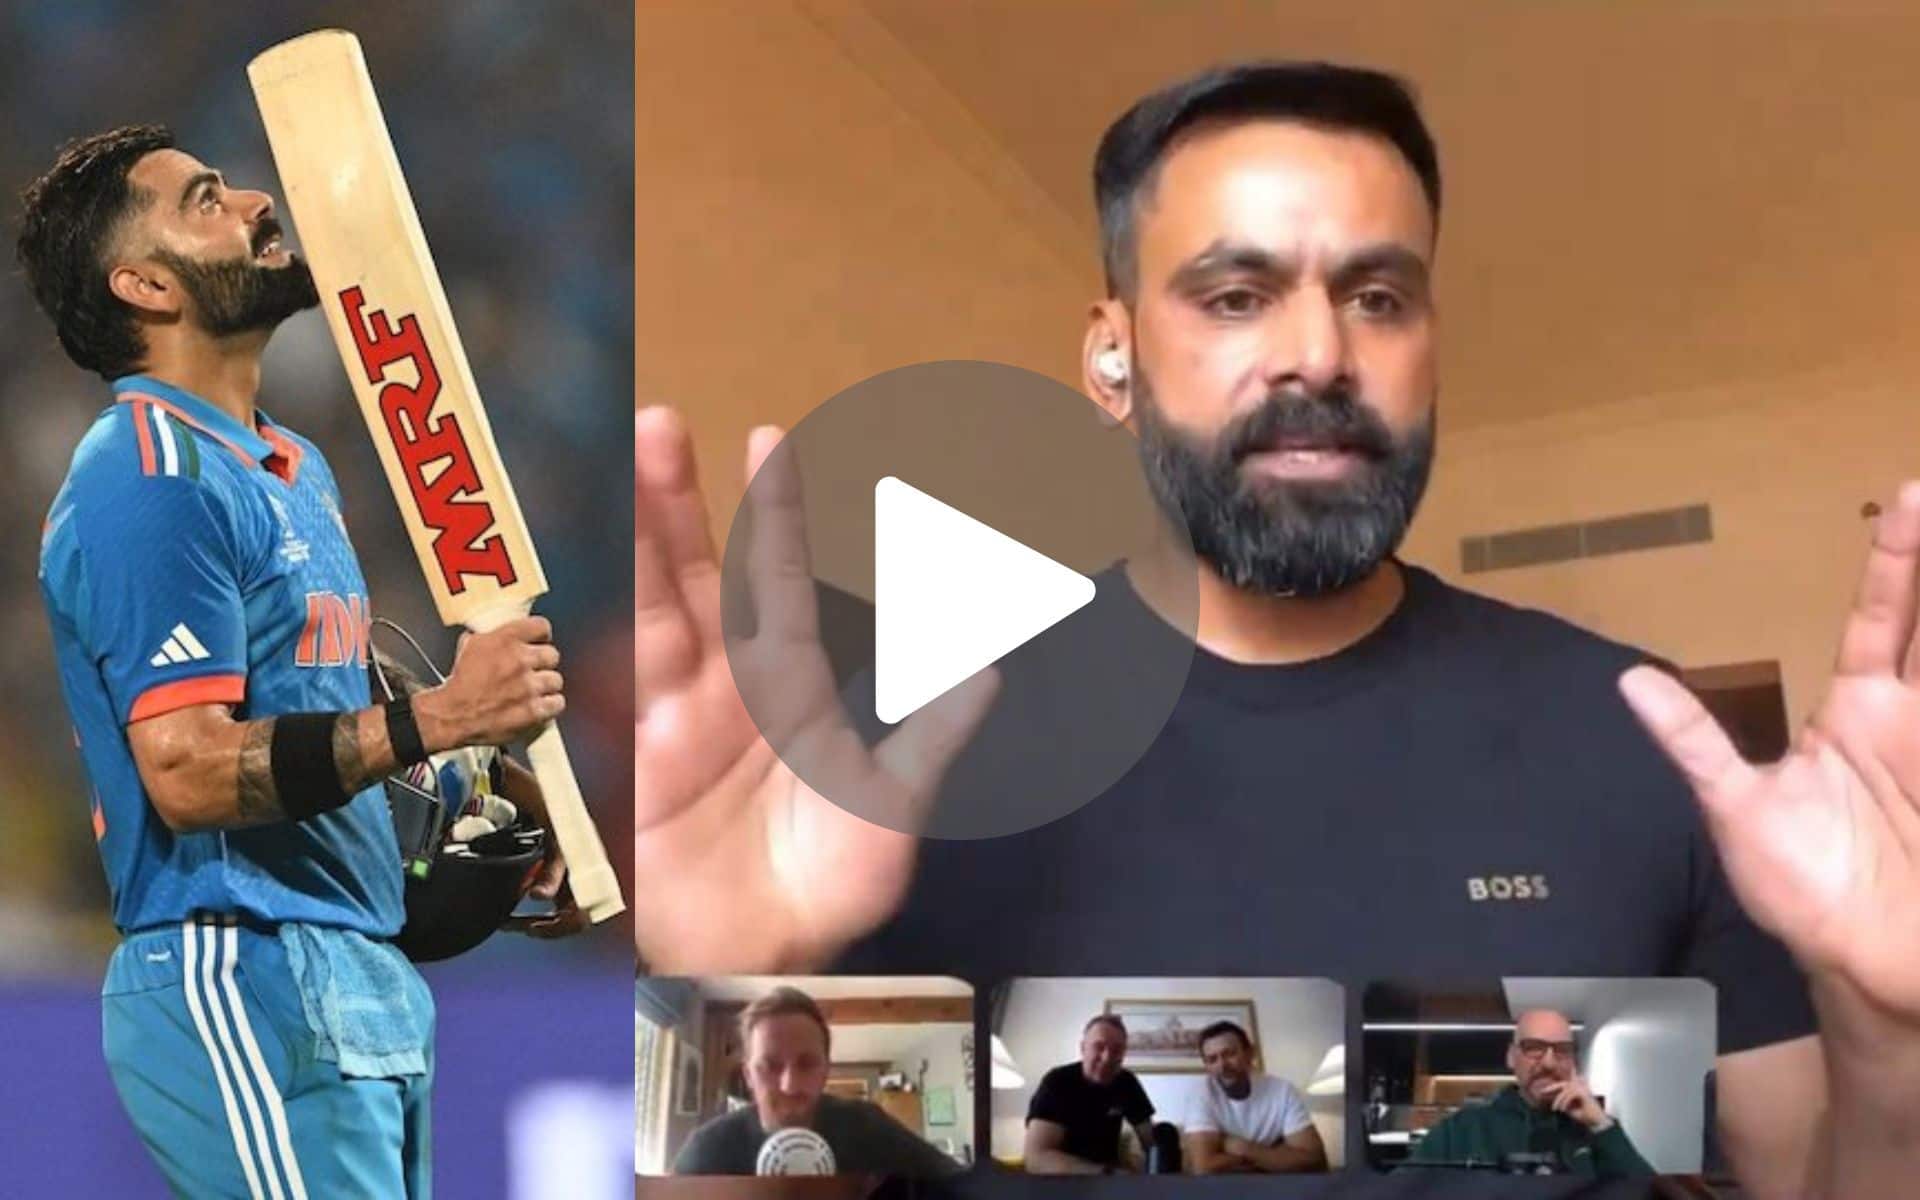 [Watch] 'Kohli Is A Selfish Player': Mohammad Hafeez Makes Controversial Remarks